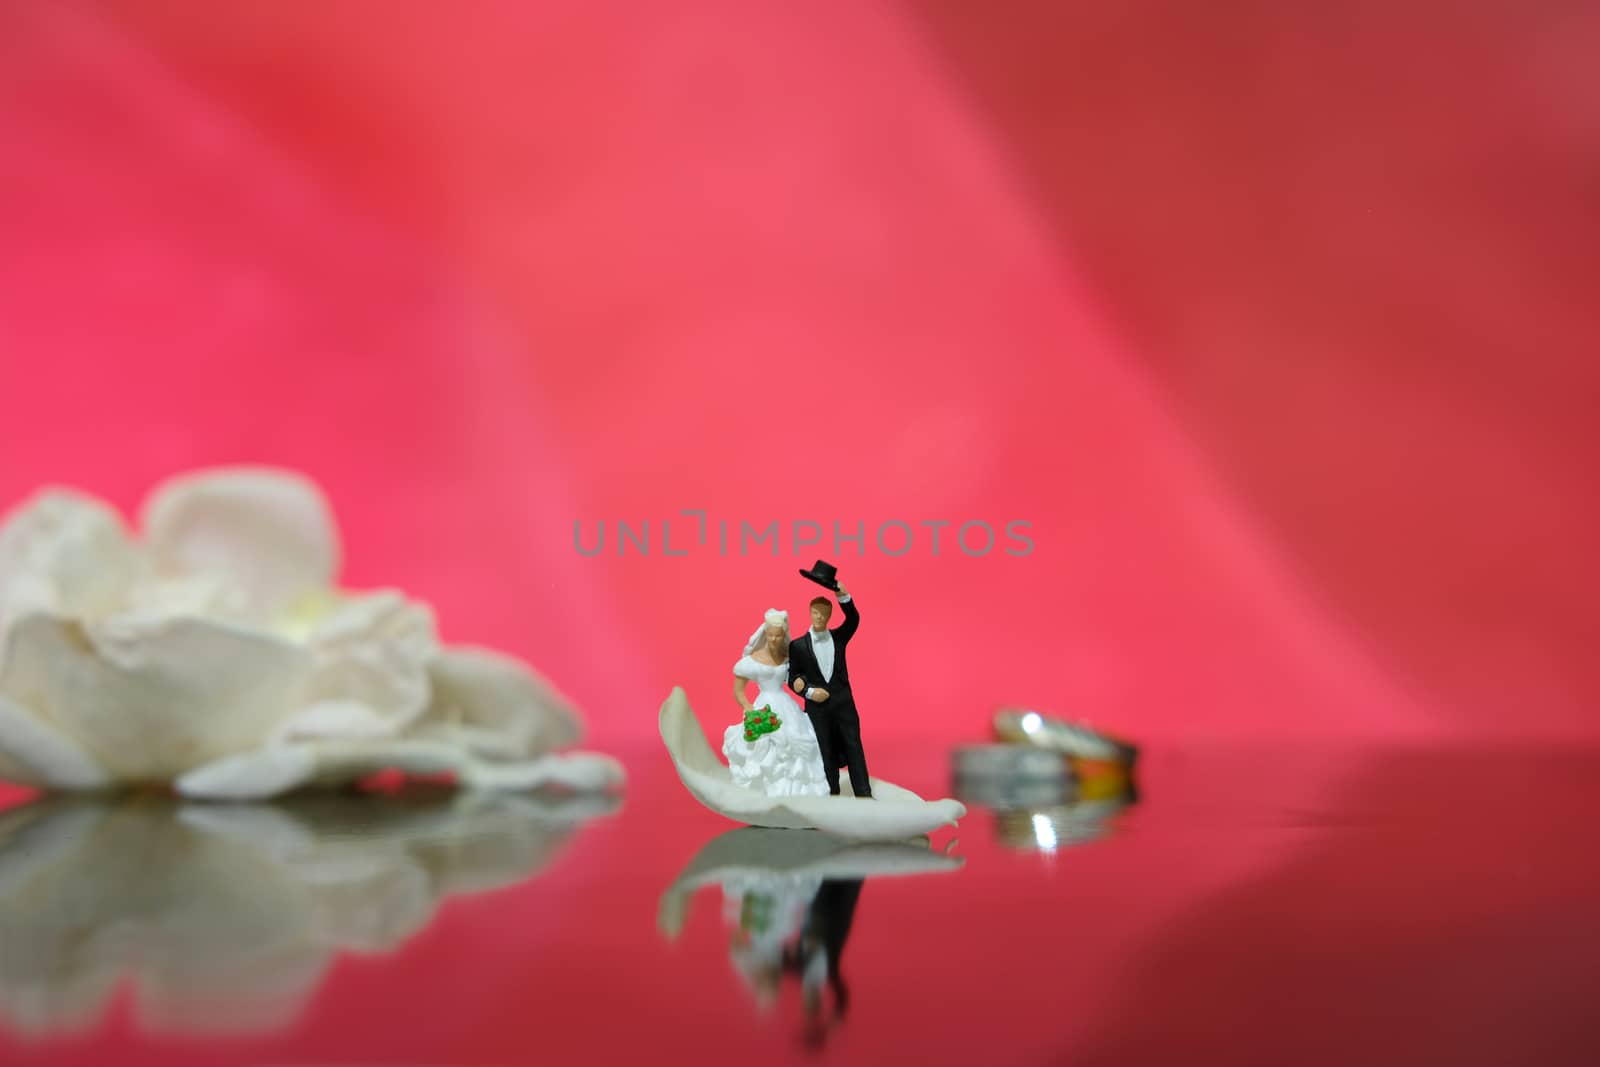 Miniature photography - garden flower outdoor wedding concept, bride and groom walking on shiny floor with white rose petal